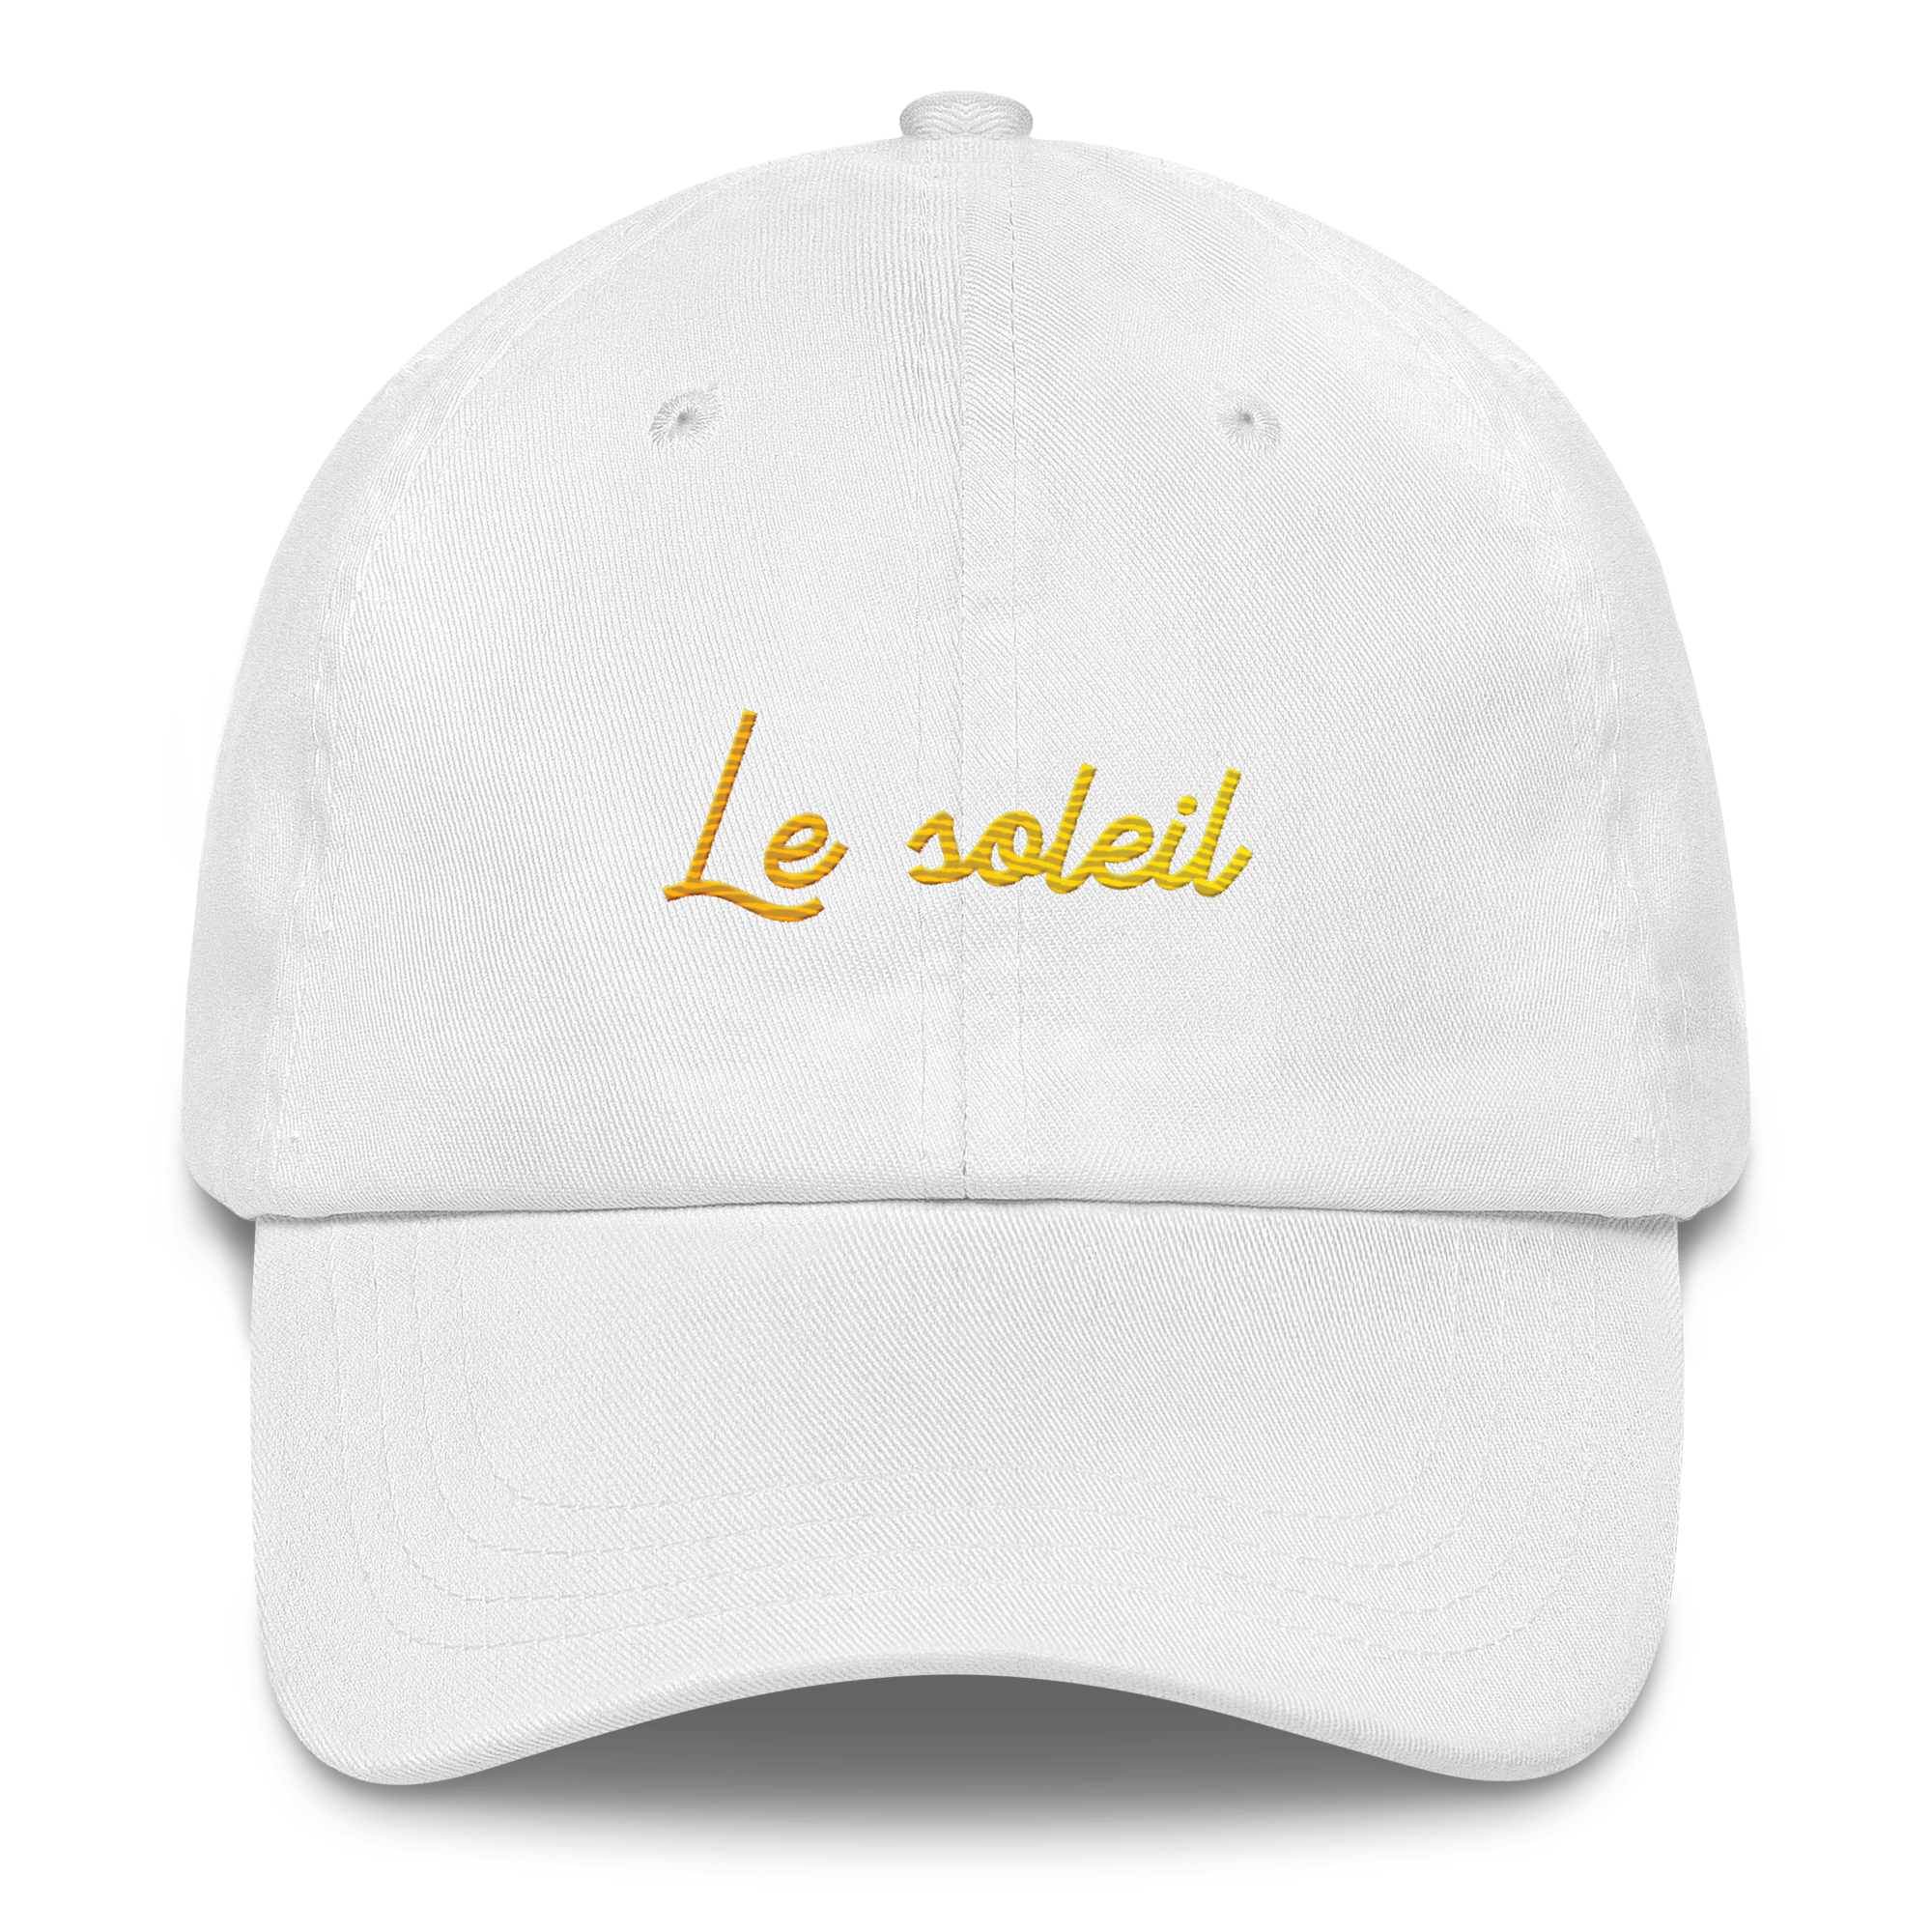 classic-dad-hat-white-front-6671b03c48c92.png